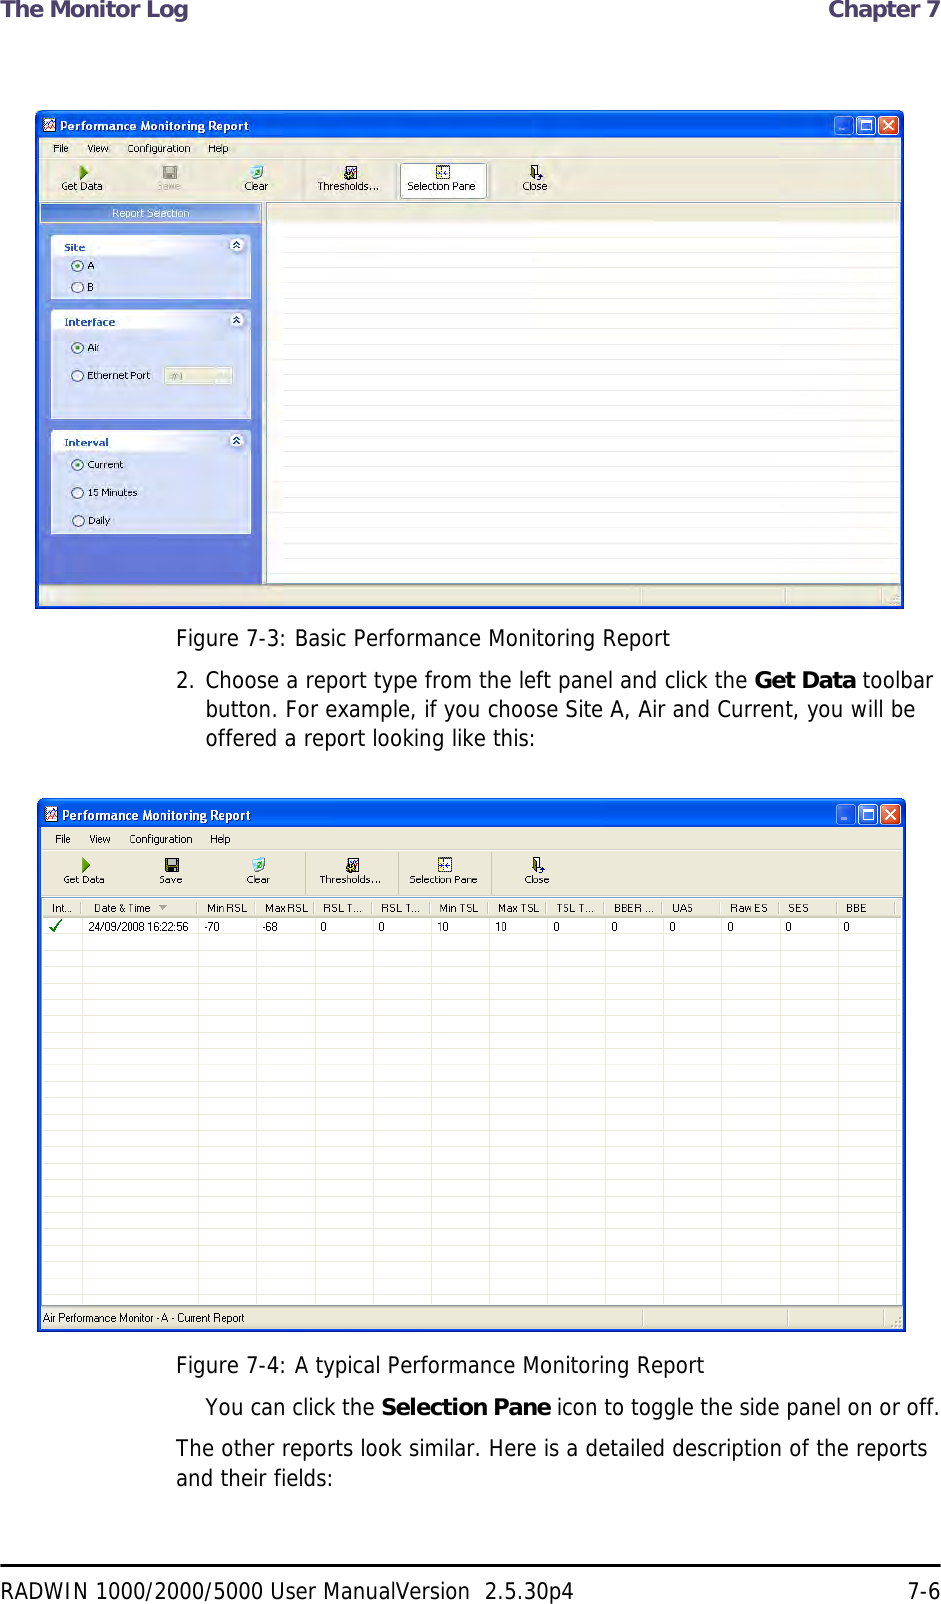 The Monitor Log  Chapter 7RADWIN 1000/2000/5000 User ManualVersion  2.5.30p4 7-6Figure 7-3: Basic Performance Monitoring Report2. Choose a report type from the left panel and click the Get Data toolbar button. For example, if you choose Site A, Air and Current, you will be offered a report looking like this:Figure 7-4: A typical Performance Monitoring ReportYou can click the Selection Pane icon to toggle the side panel on or off.The other reports look similar. Here is a detailed description of the reports and their fields: